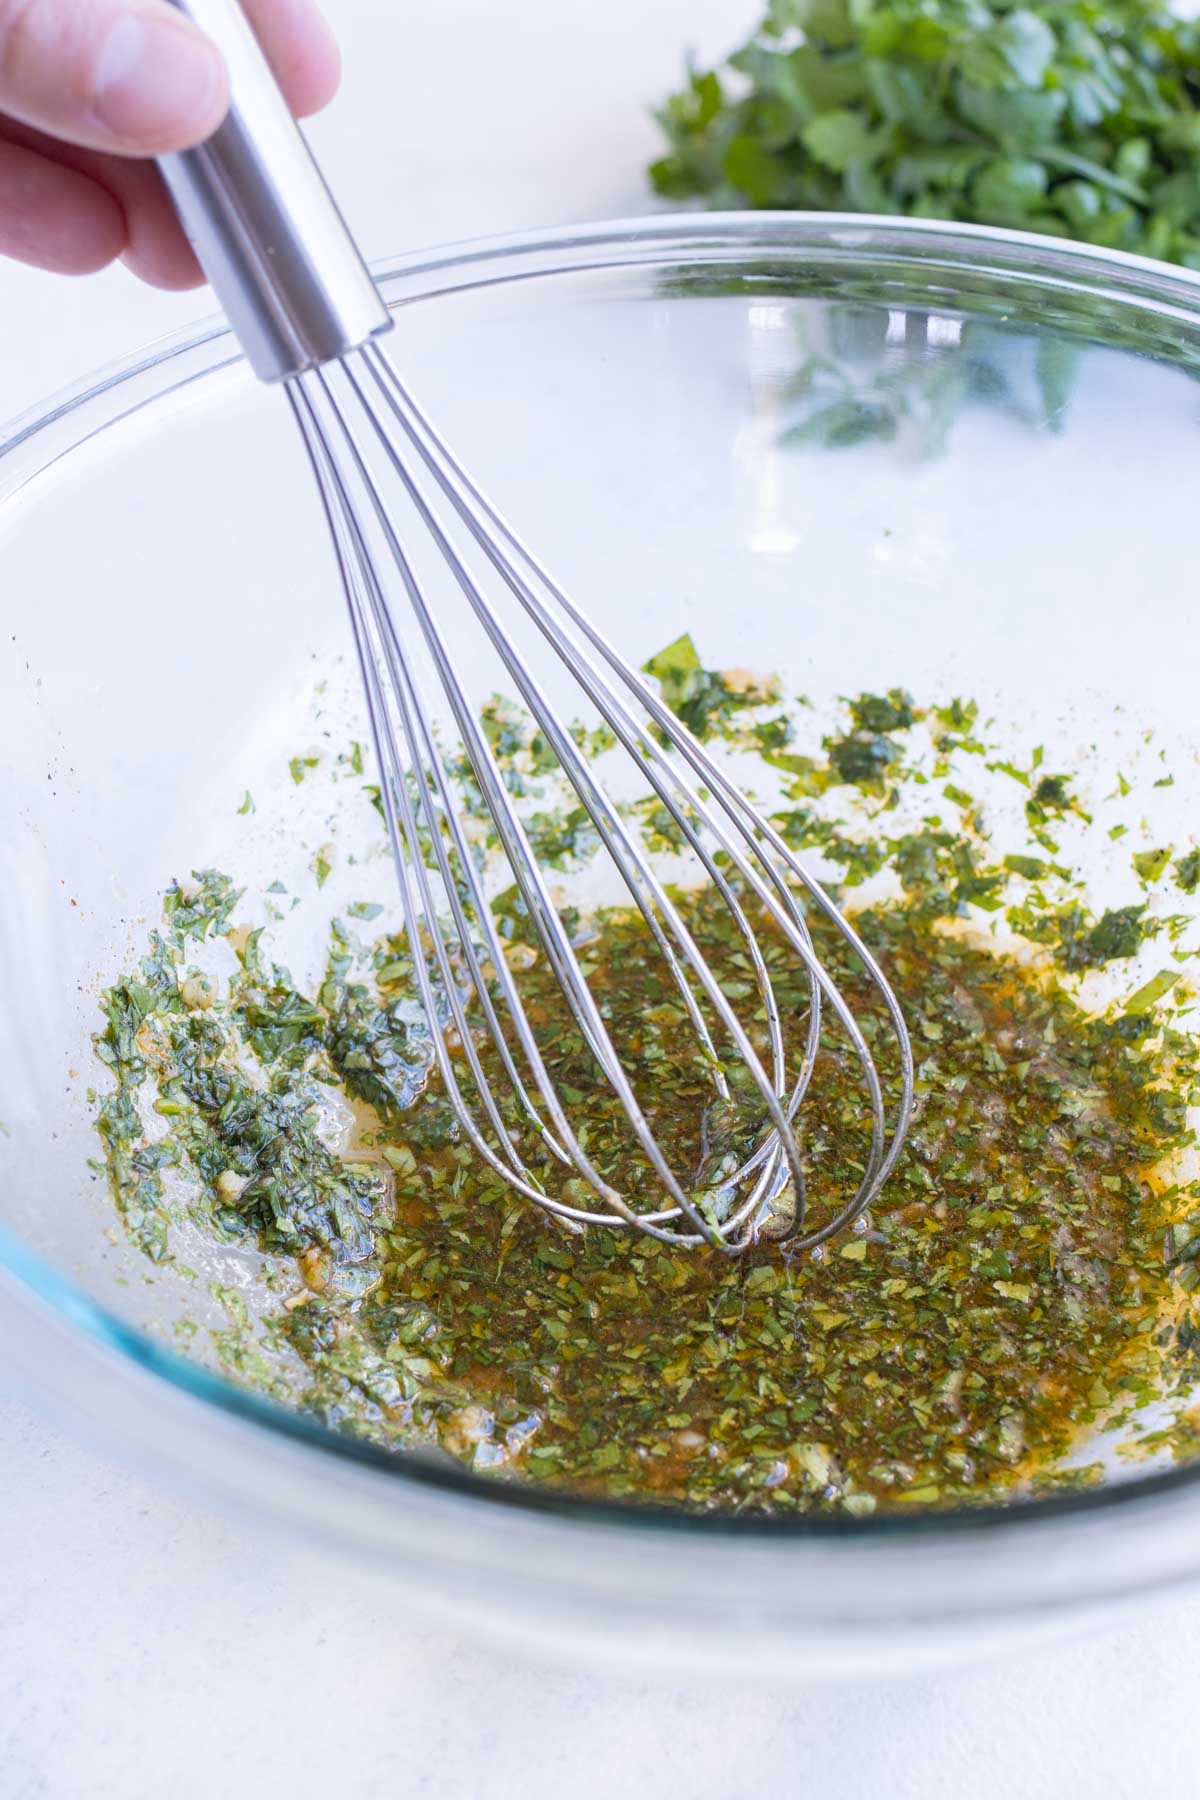 Cilantro is mixed into the sauce ingredients.